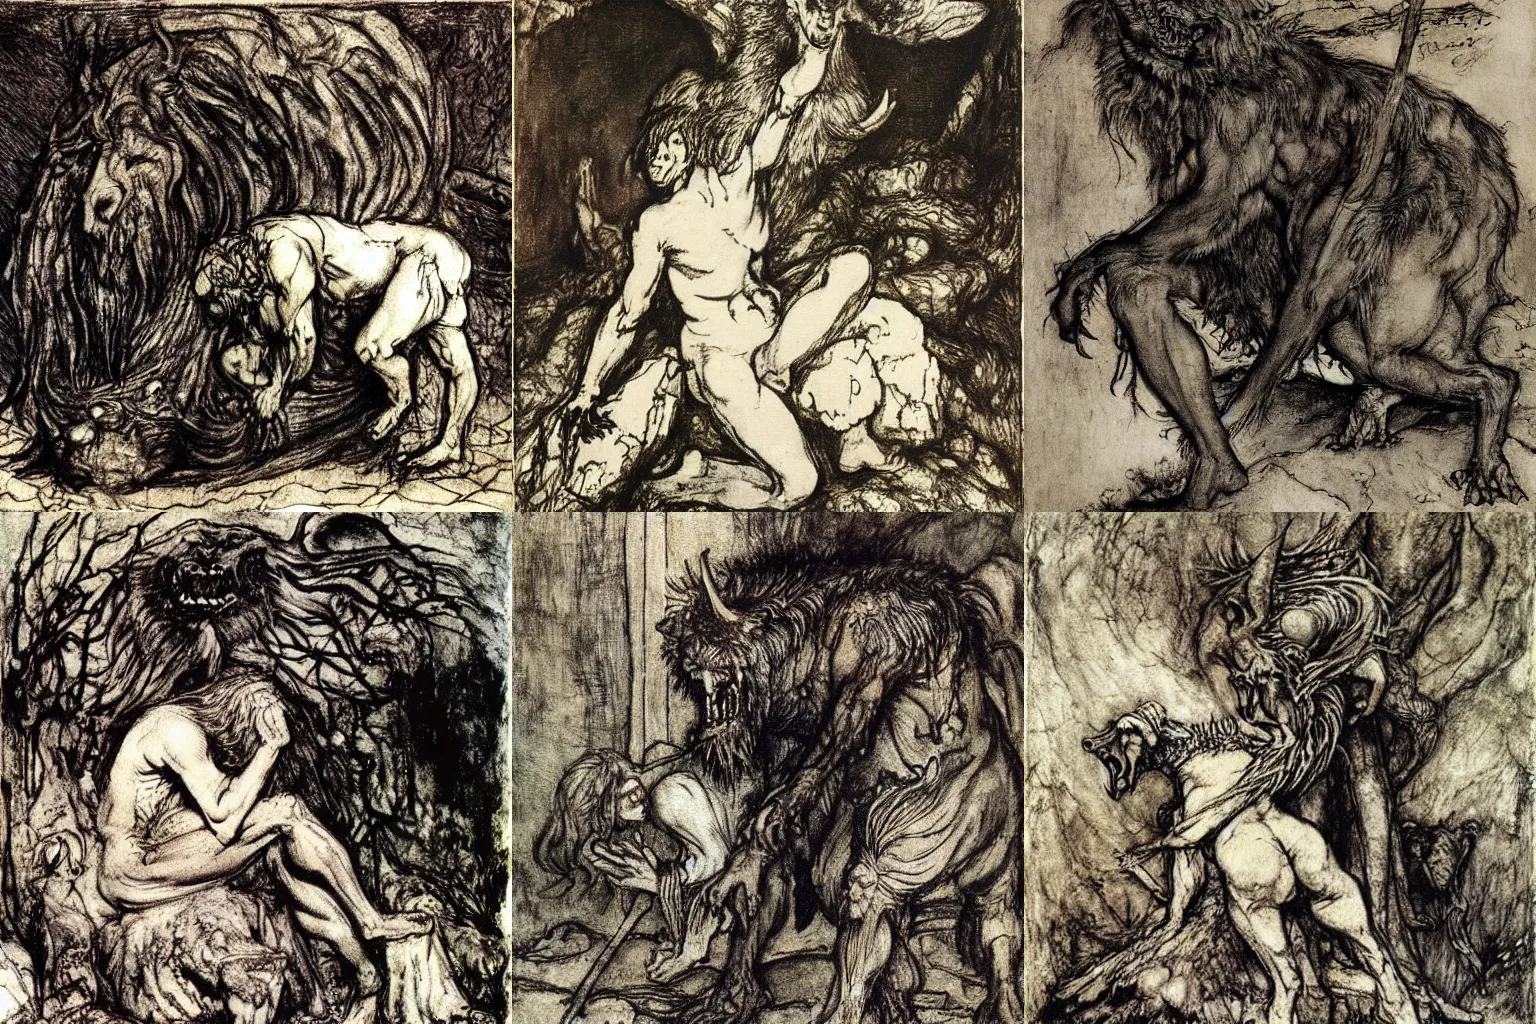 Prompt: what rough beast slouches towards bethlehem to be born? painting by arthur rackham and diego velazquez.